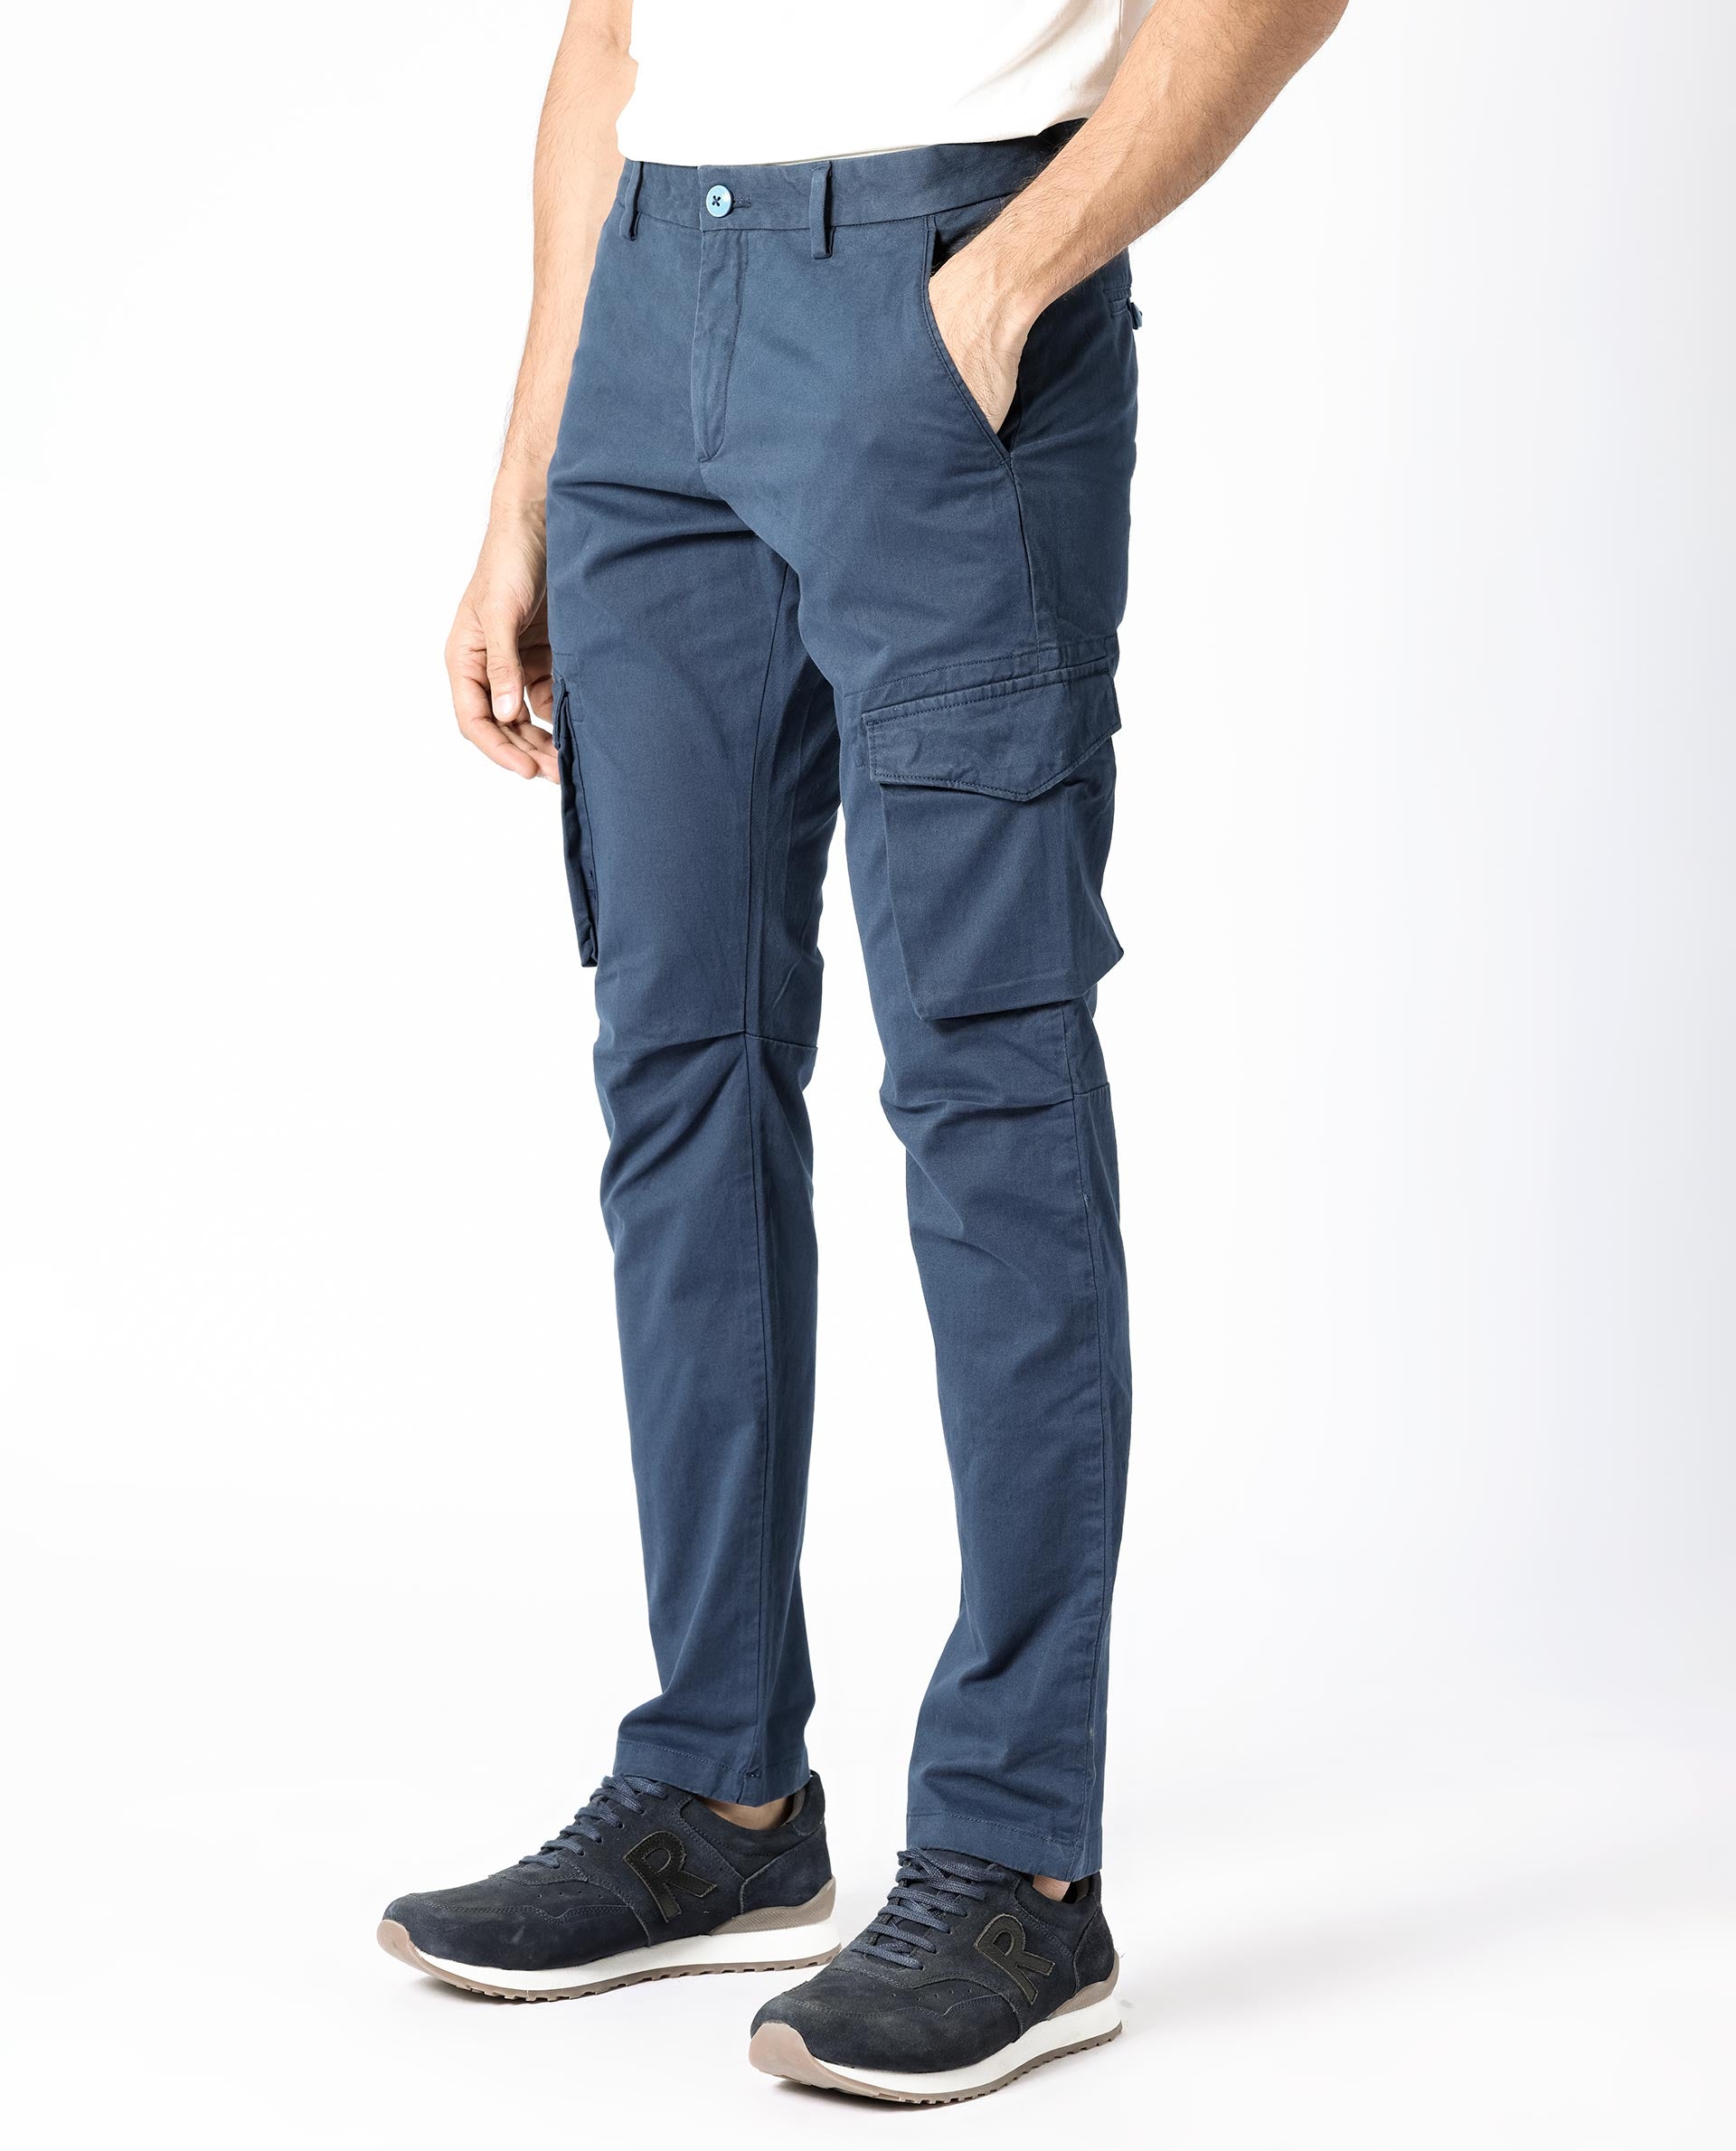 Men's Casual Cargo Pants with 8 Pockets Cotton Cargo Work Pants(No Belt) |  SHEIN USA